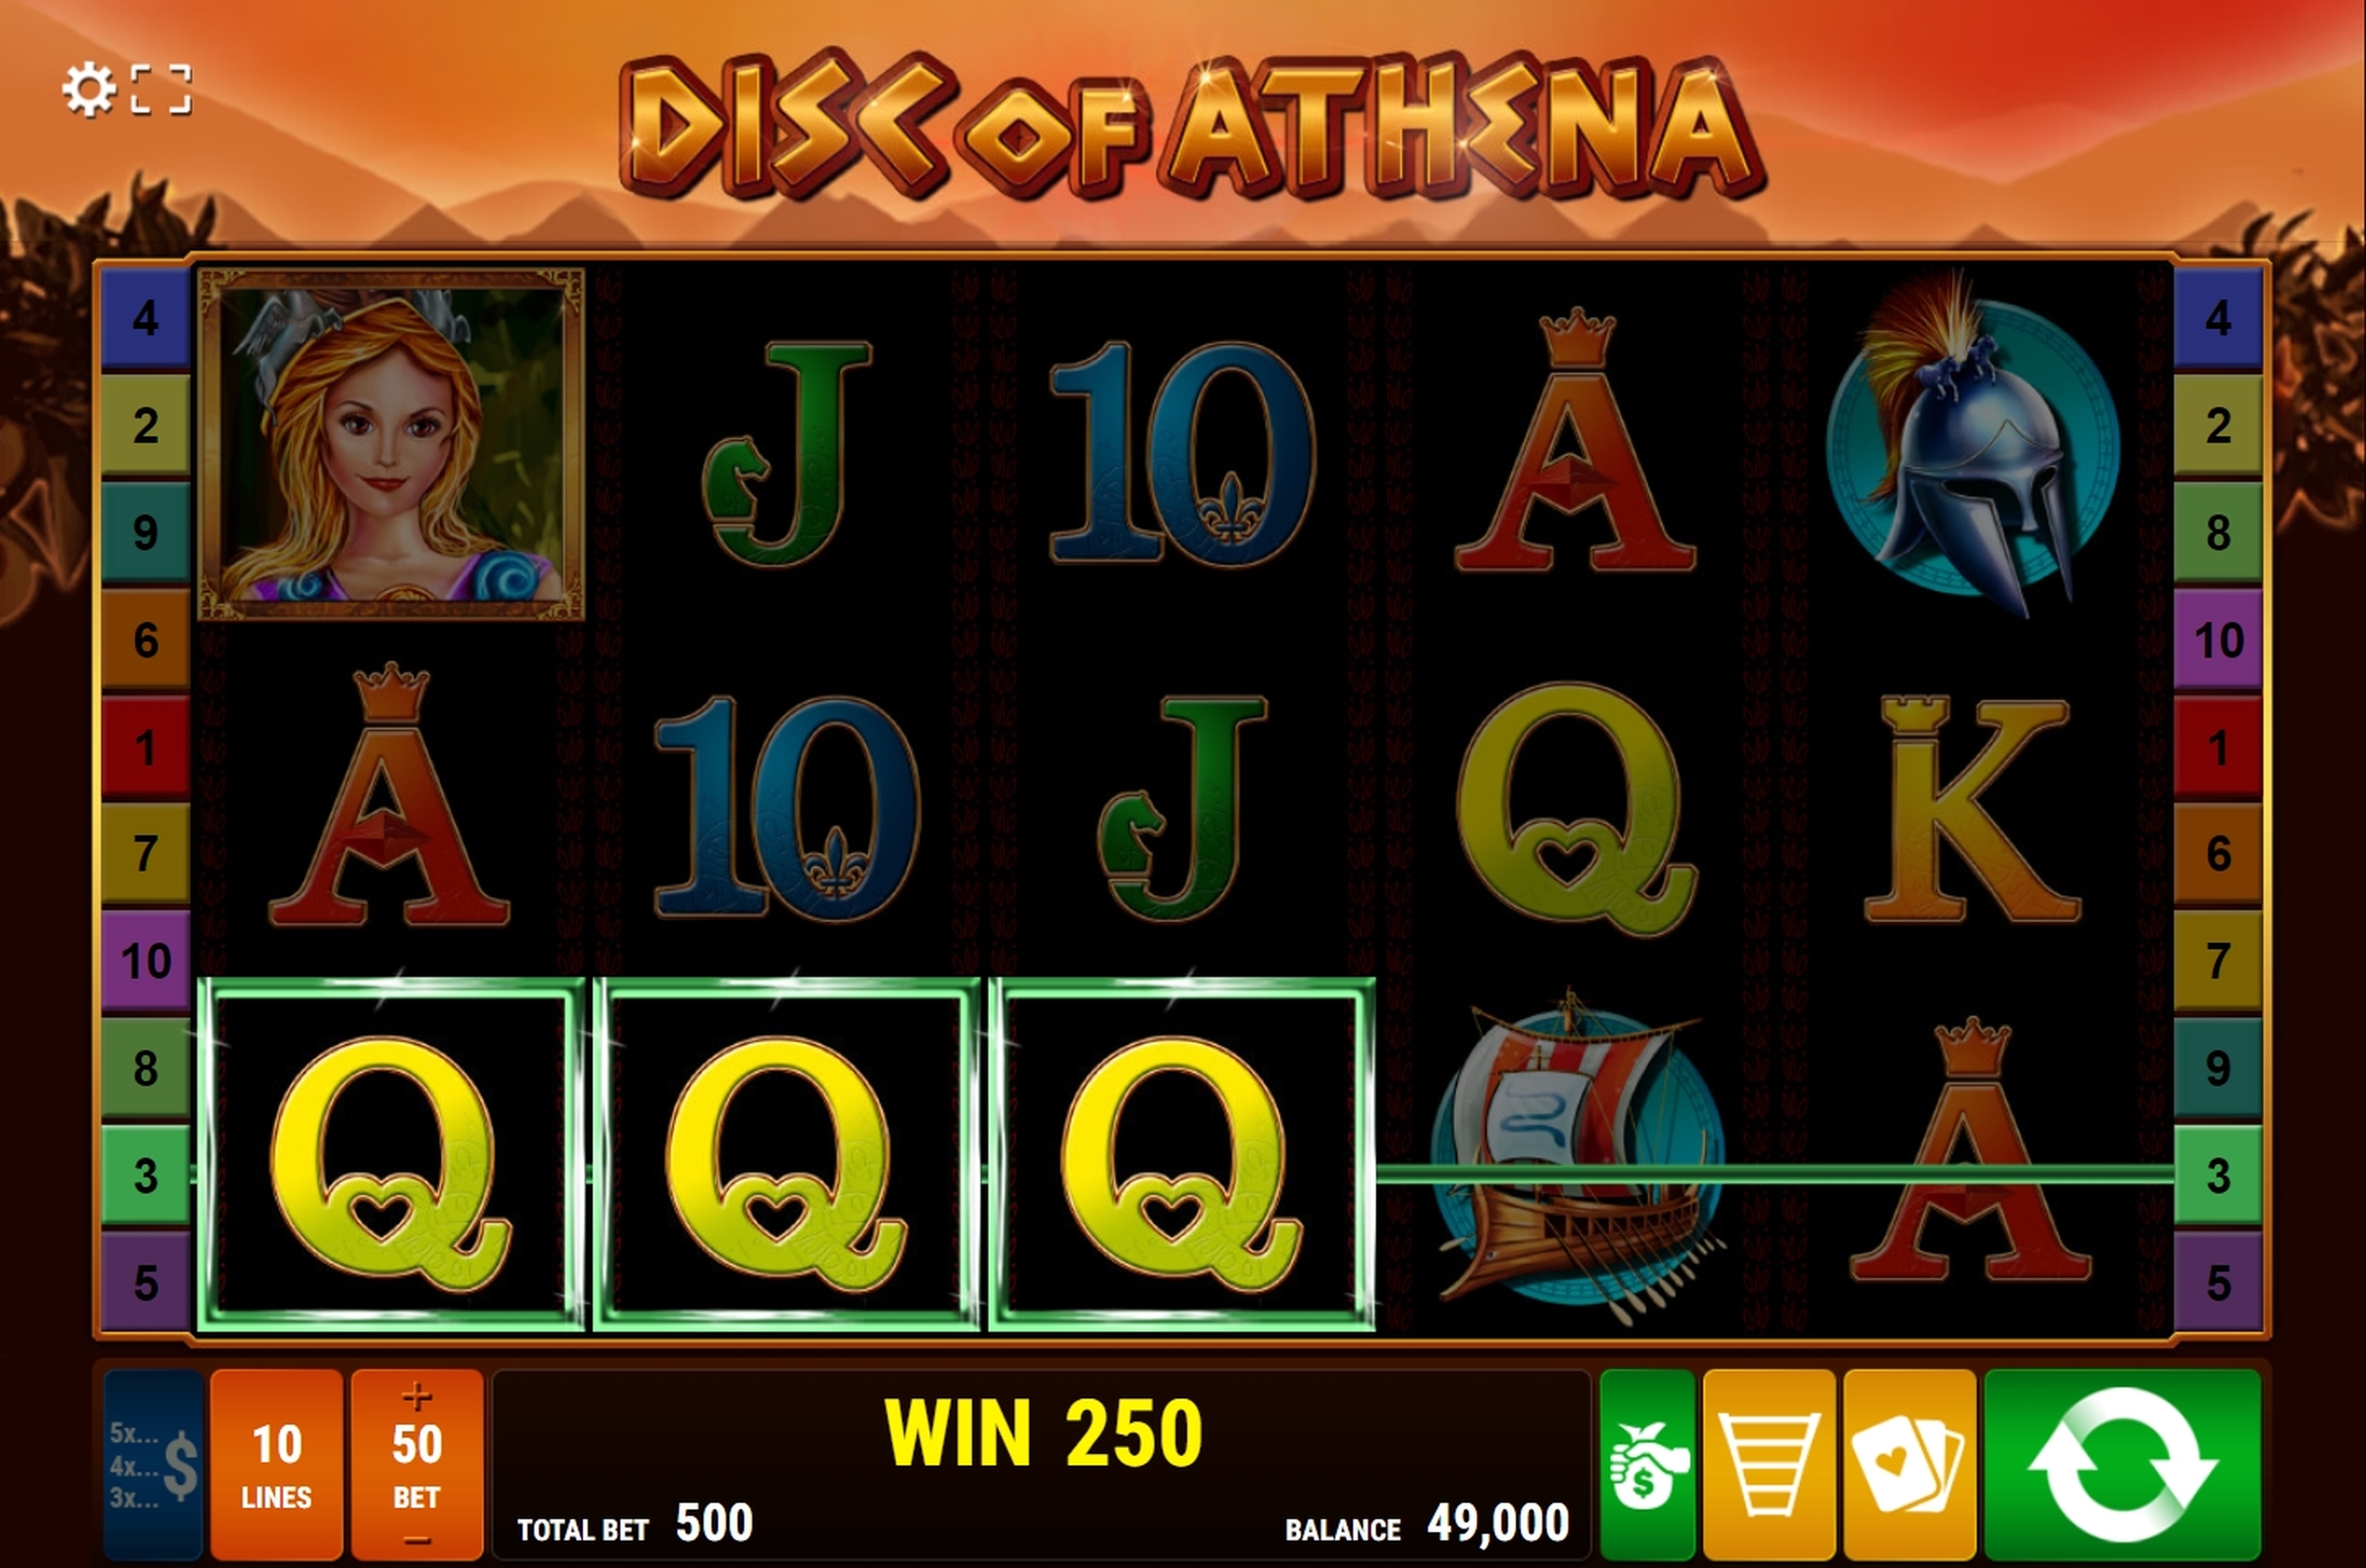 Win Money in Disc of Athena Free Slot Game by Bally Wulff